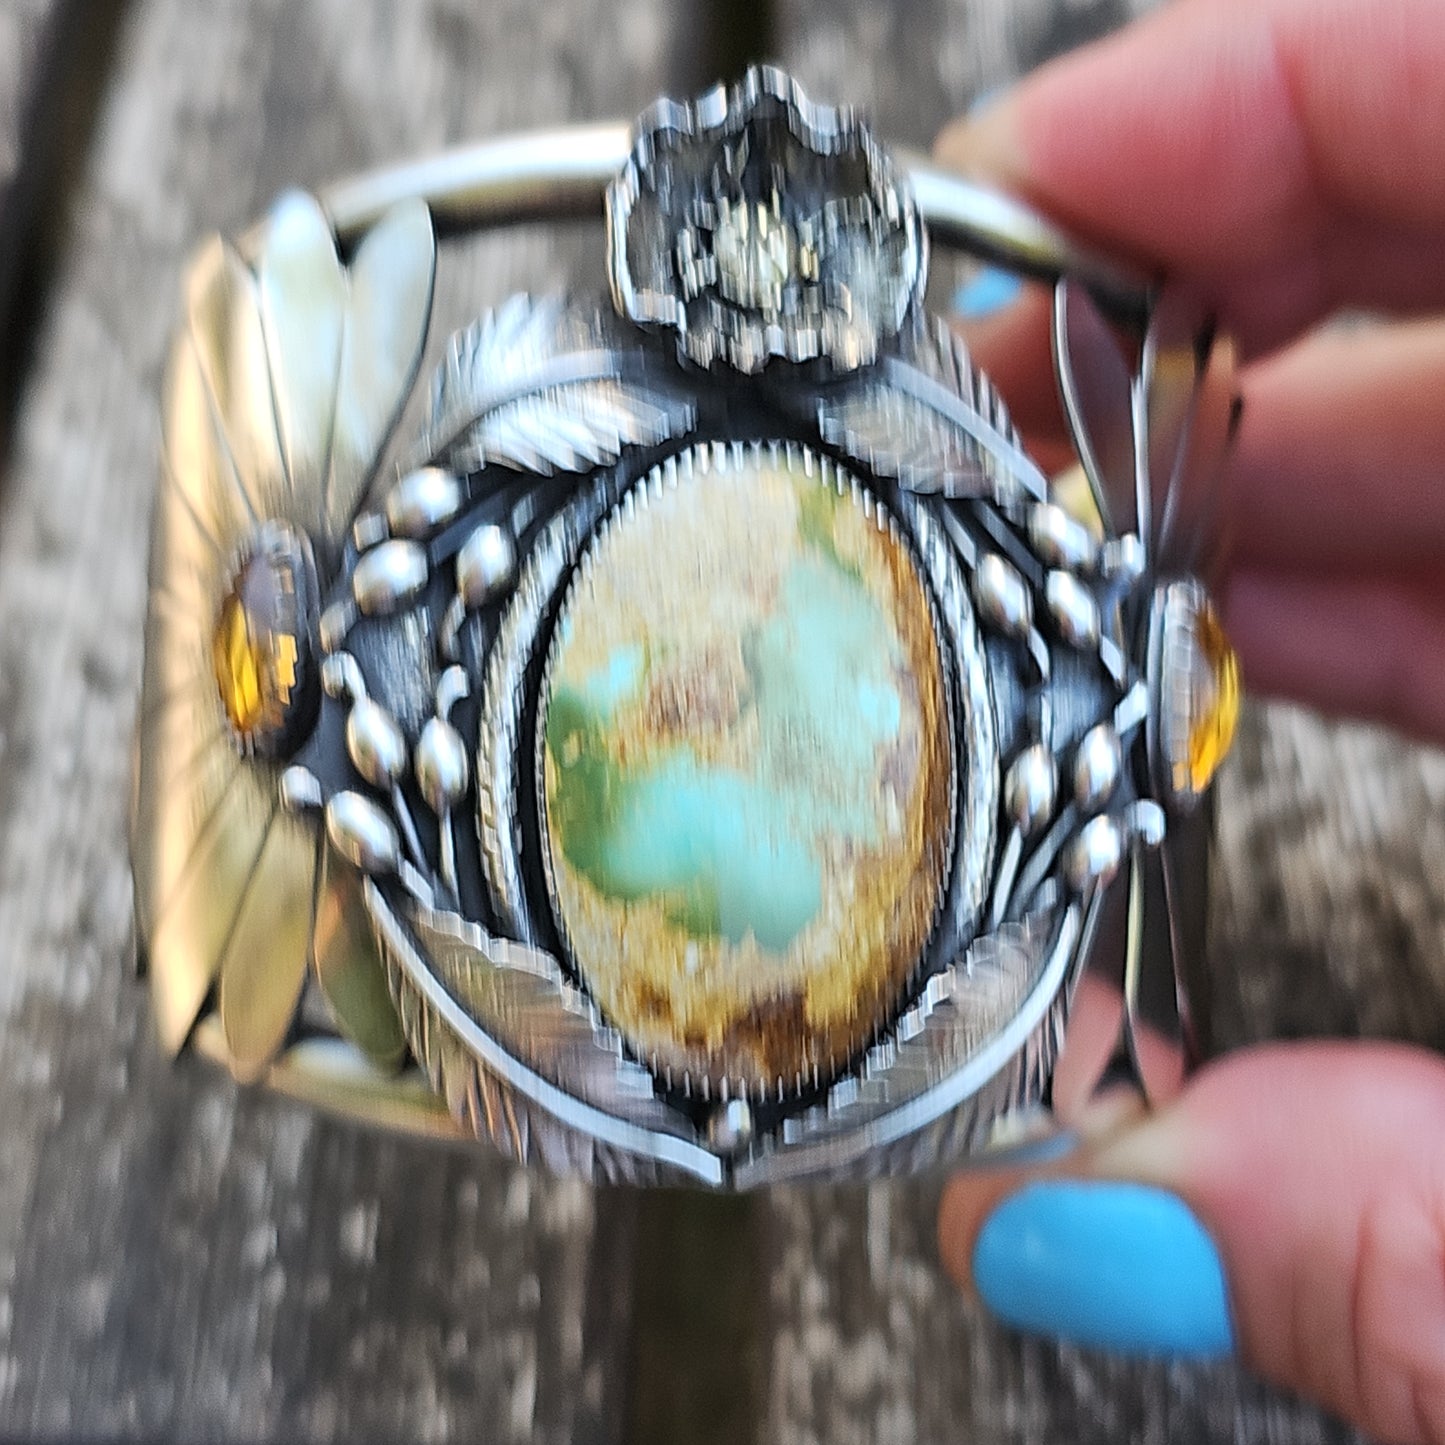 XX//WILD FLOWER WOMAN Statement Cuff Bracelet - Stone Mountain Ribbon Turquoise and Citrine in All Sterling Silver size M/L